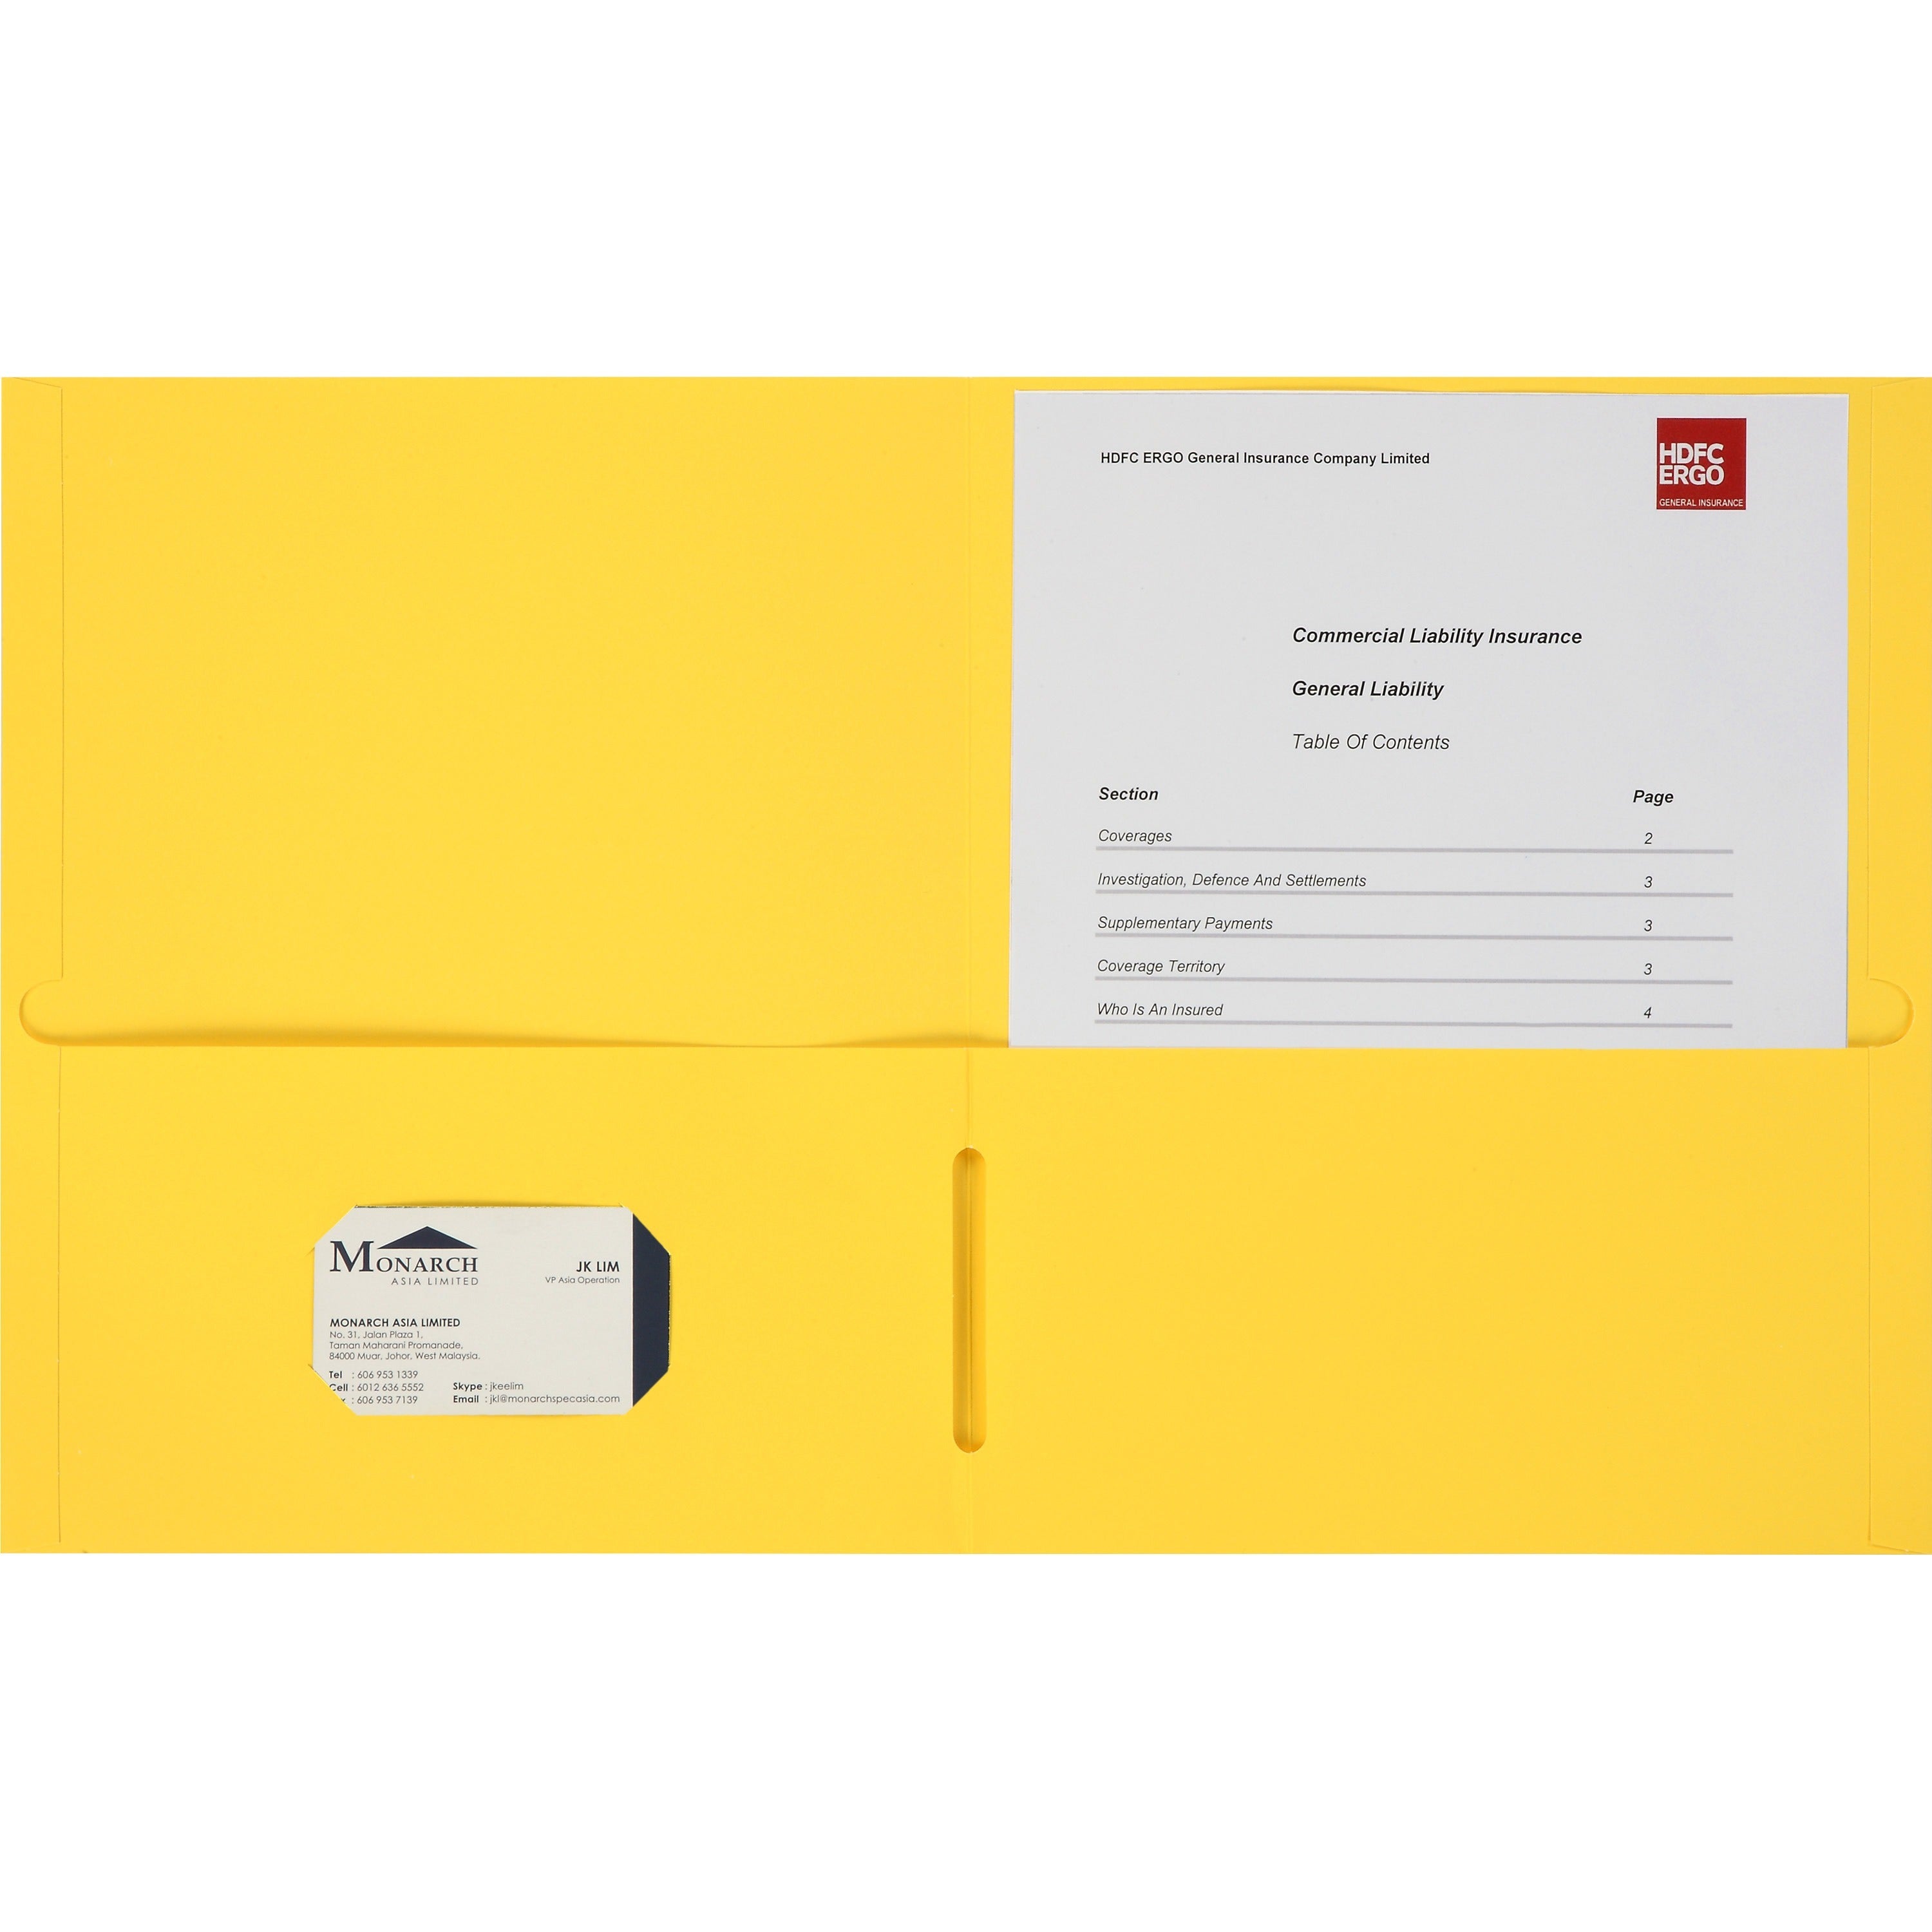 Business Source Letter Portfolio - 8 1/2" x 11" - 125 Sheet Capacity - Inside Front & Back Pocket(s) - Yellow - 25 / Box